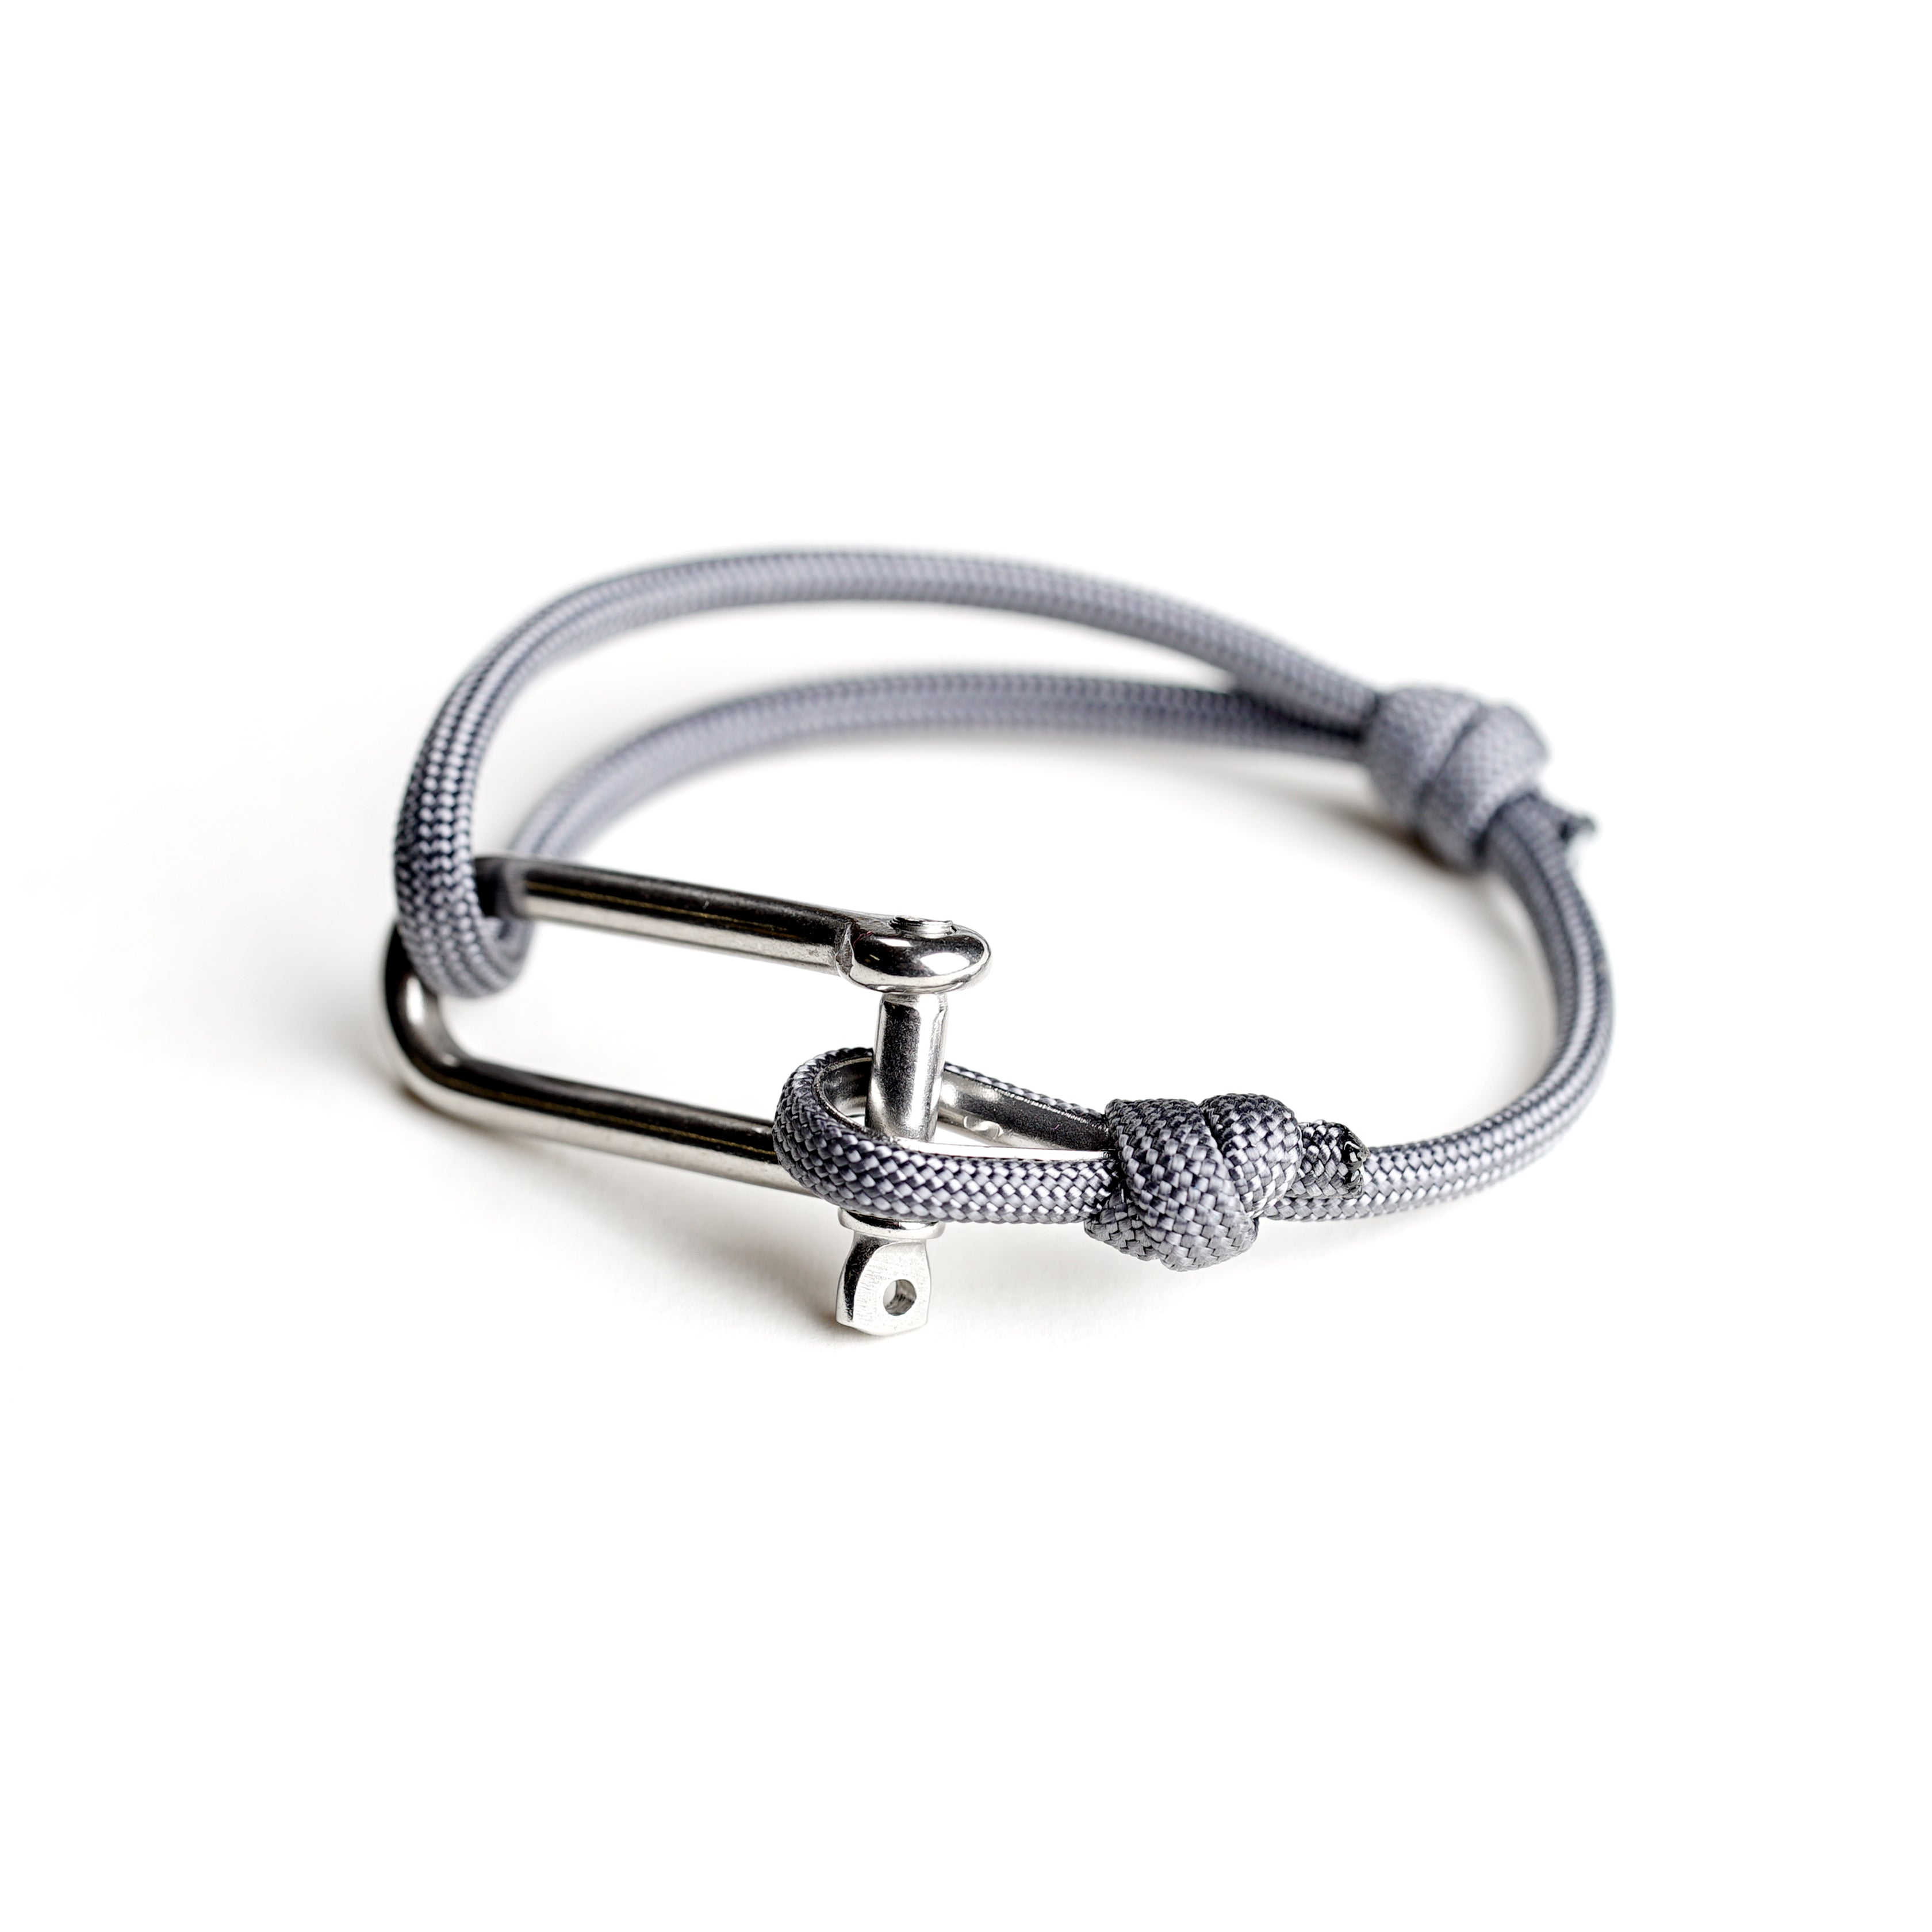 Paracord Nautical Bracelet with Stainless Steel Shackle - Grey